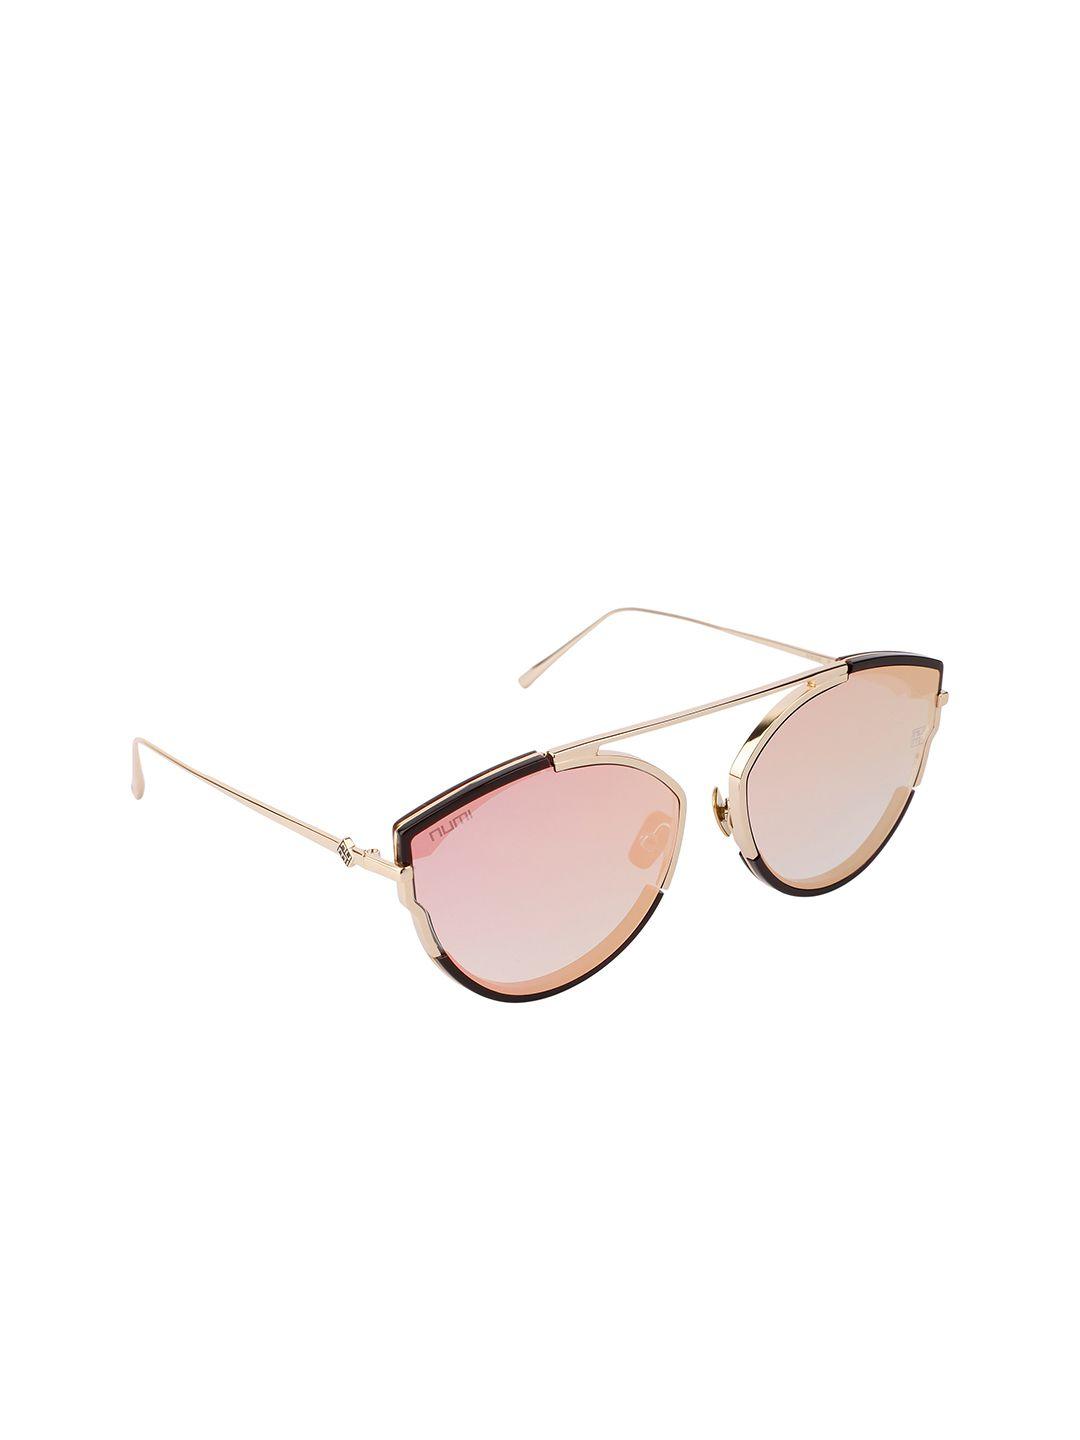 numi unisex pink lens & gold-toned oval sunglasses with uv protected lens